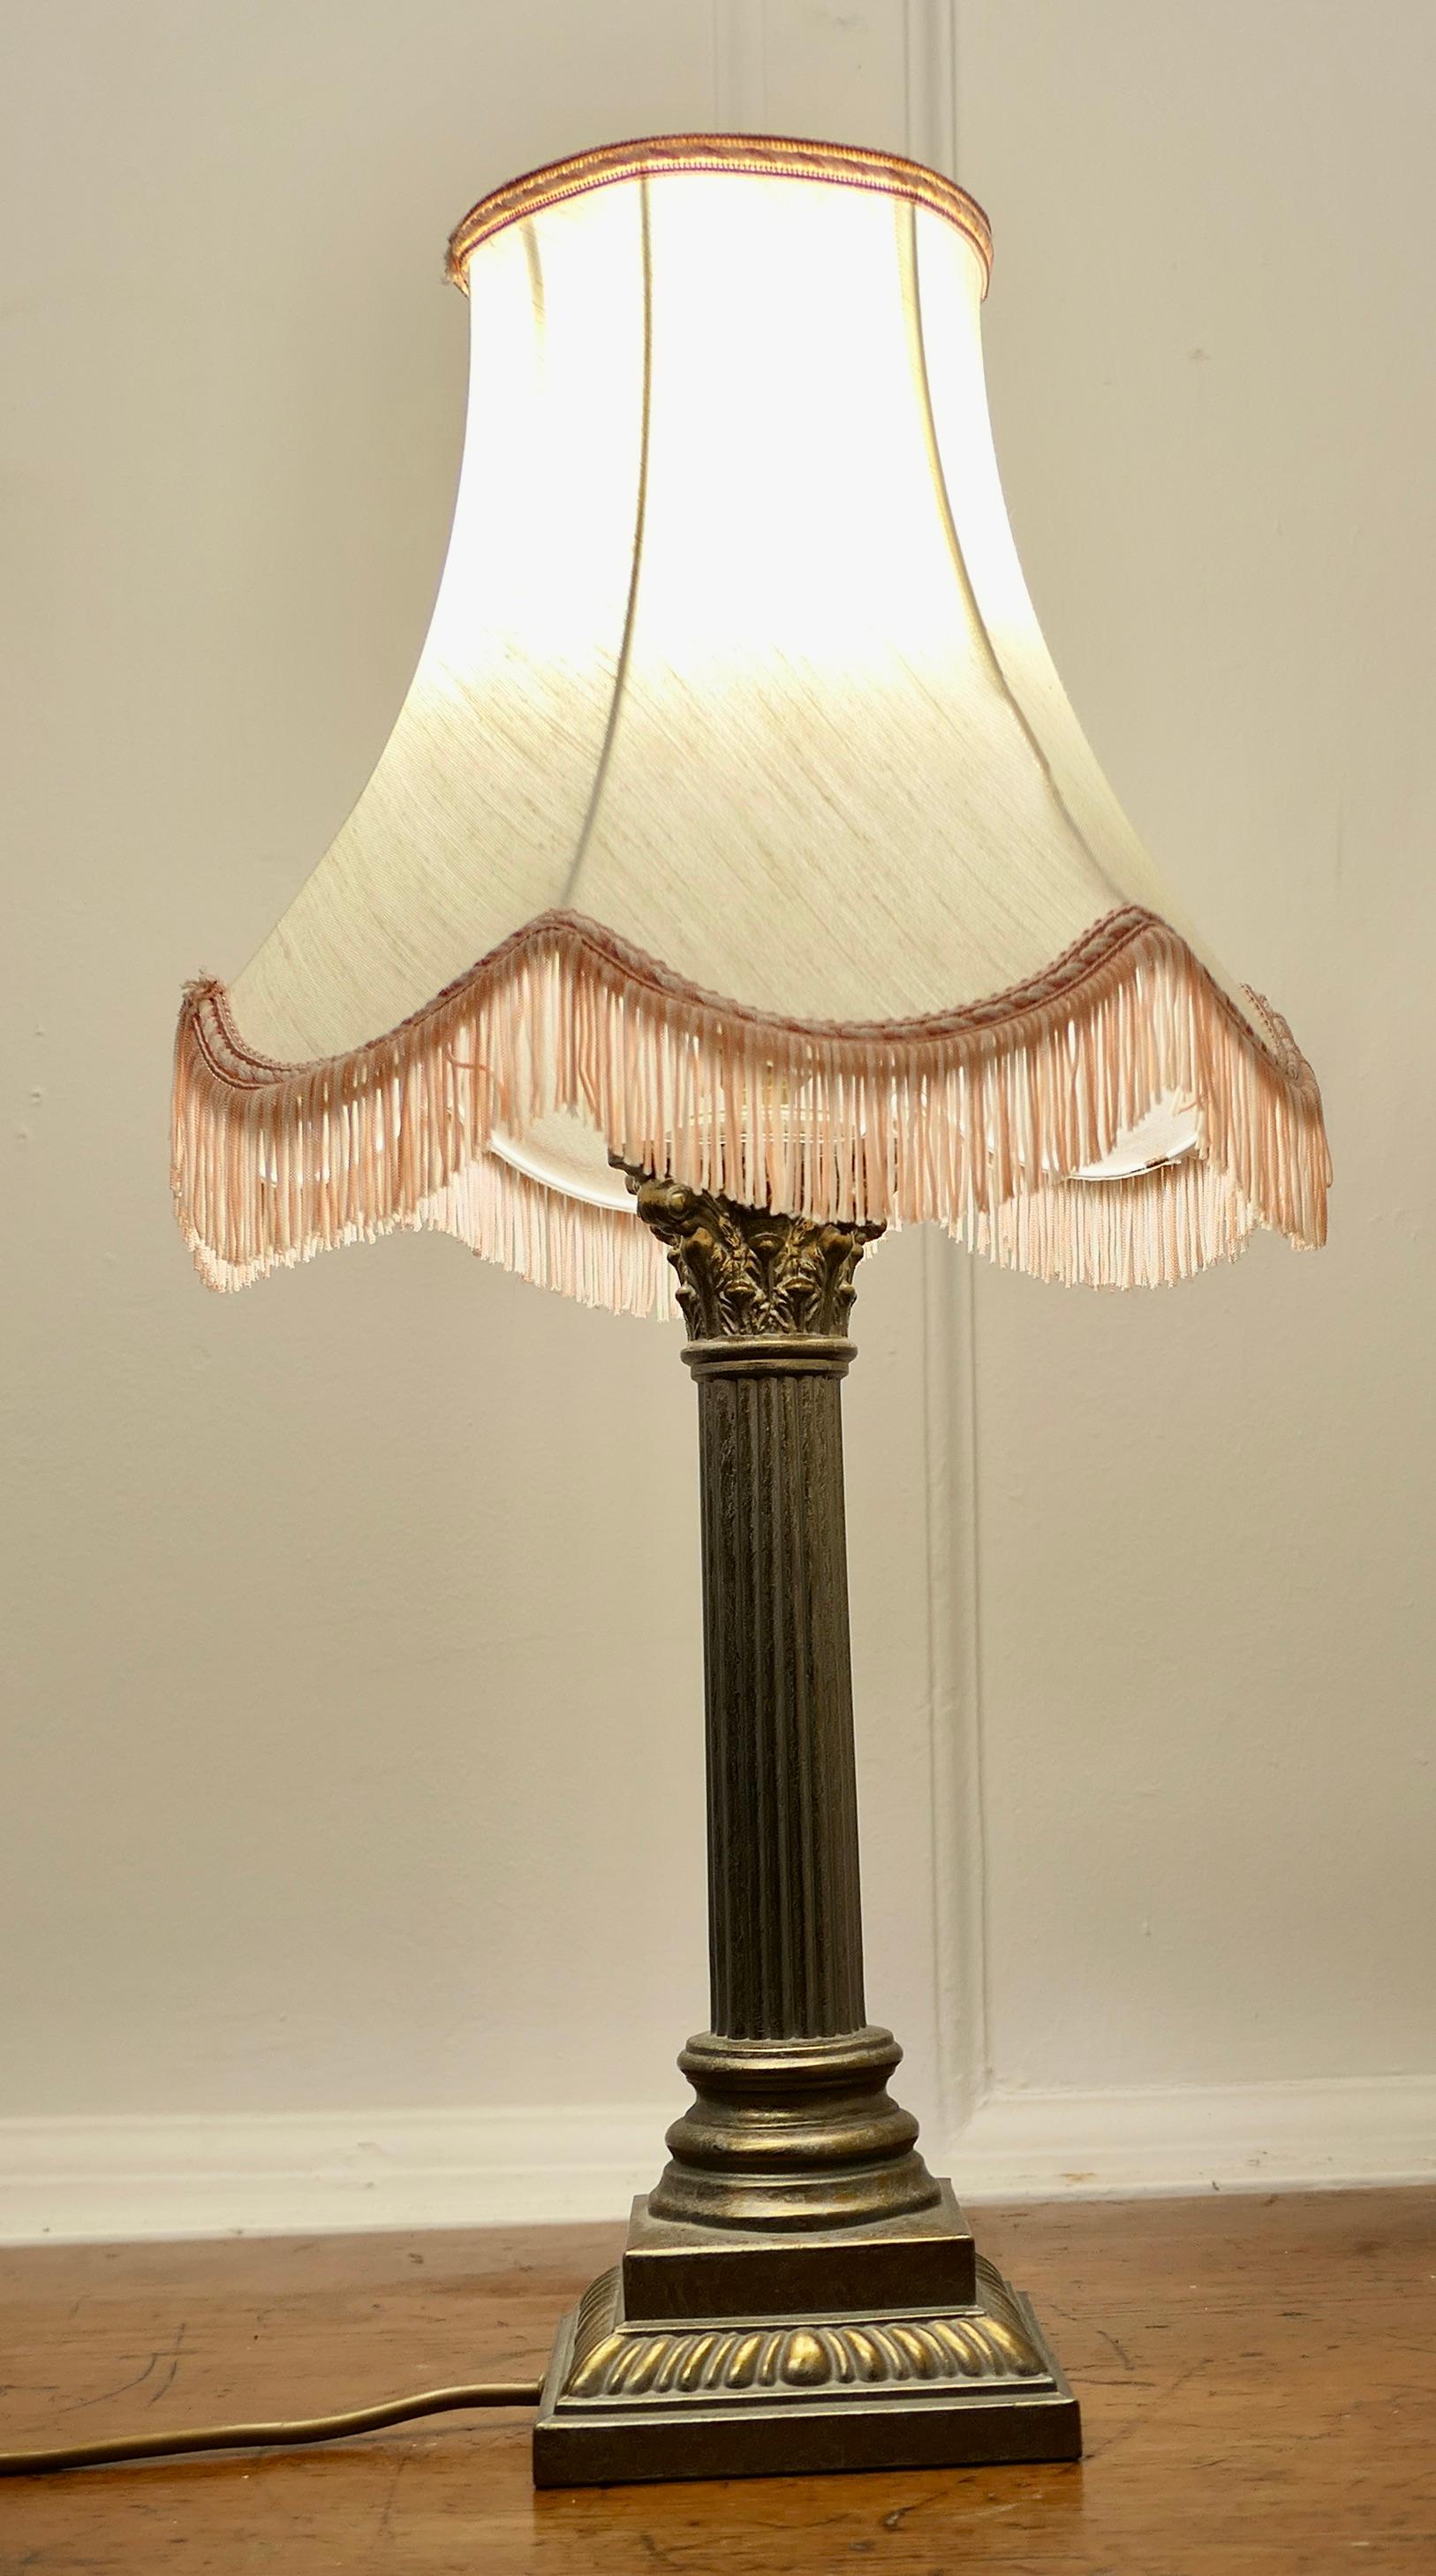 A Copper Effect Corinthian Column Table Lamp with Shade

This is a very attractive lamp it has a heavy single corinthian style column which is made in brass and finished to look like Sheffield plate with copper highlights, it is set on a stepped